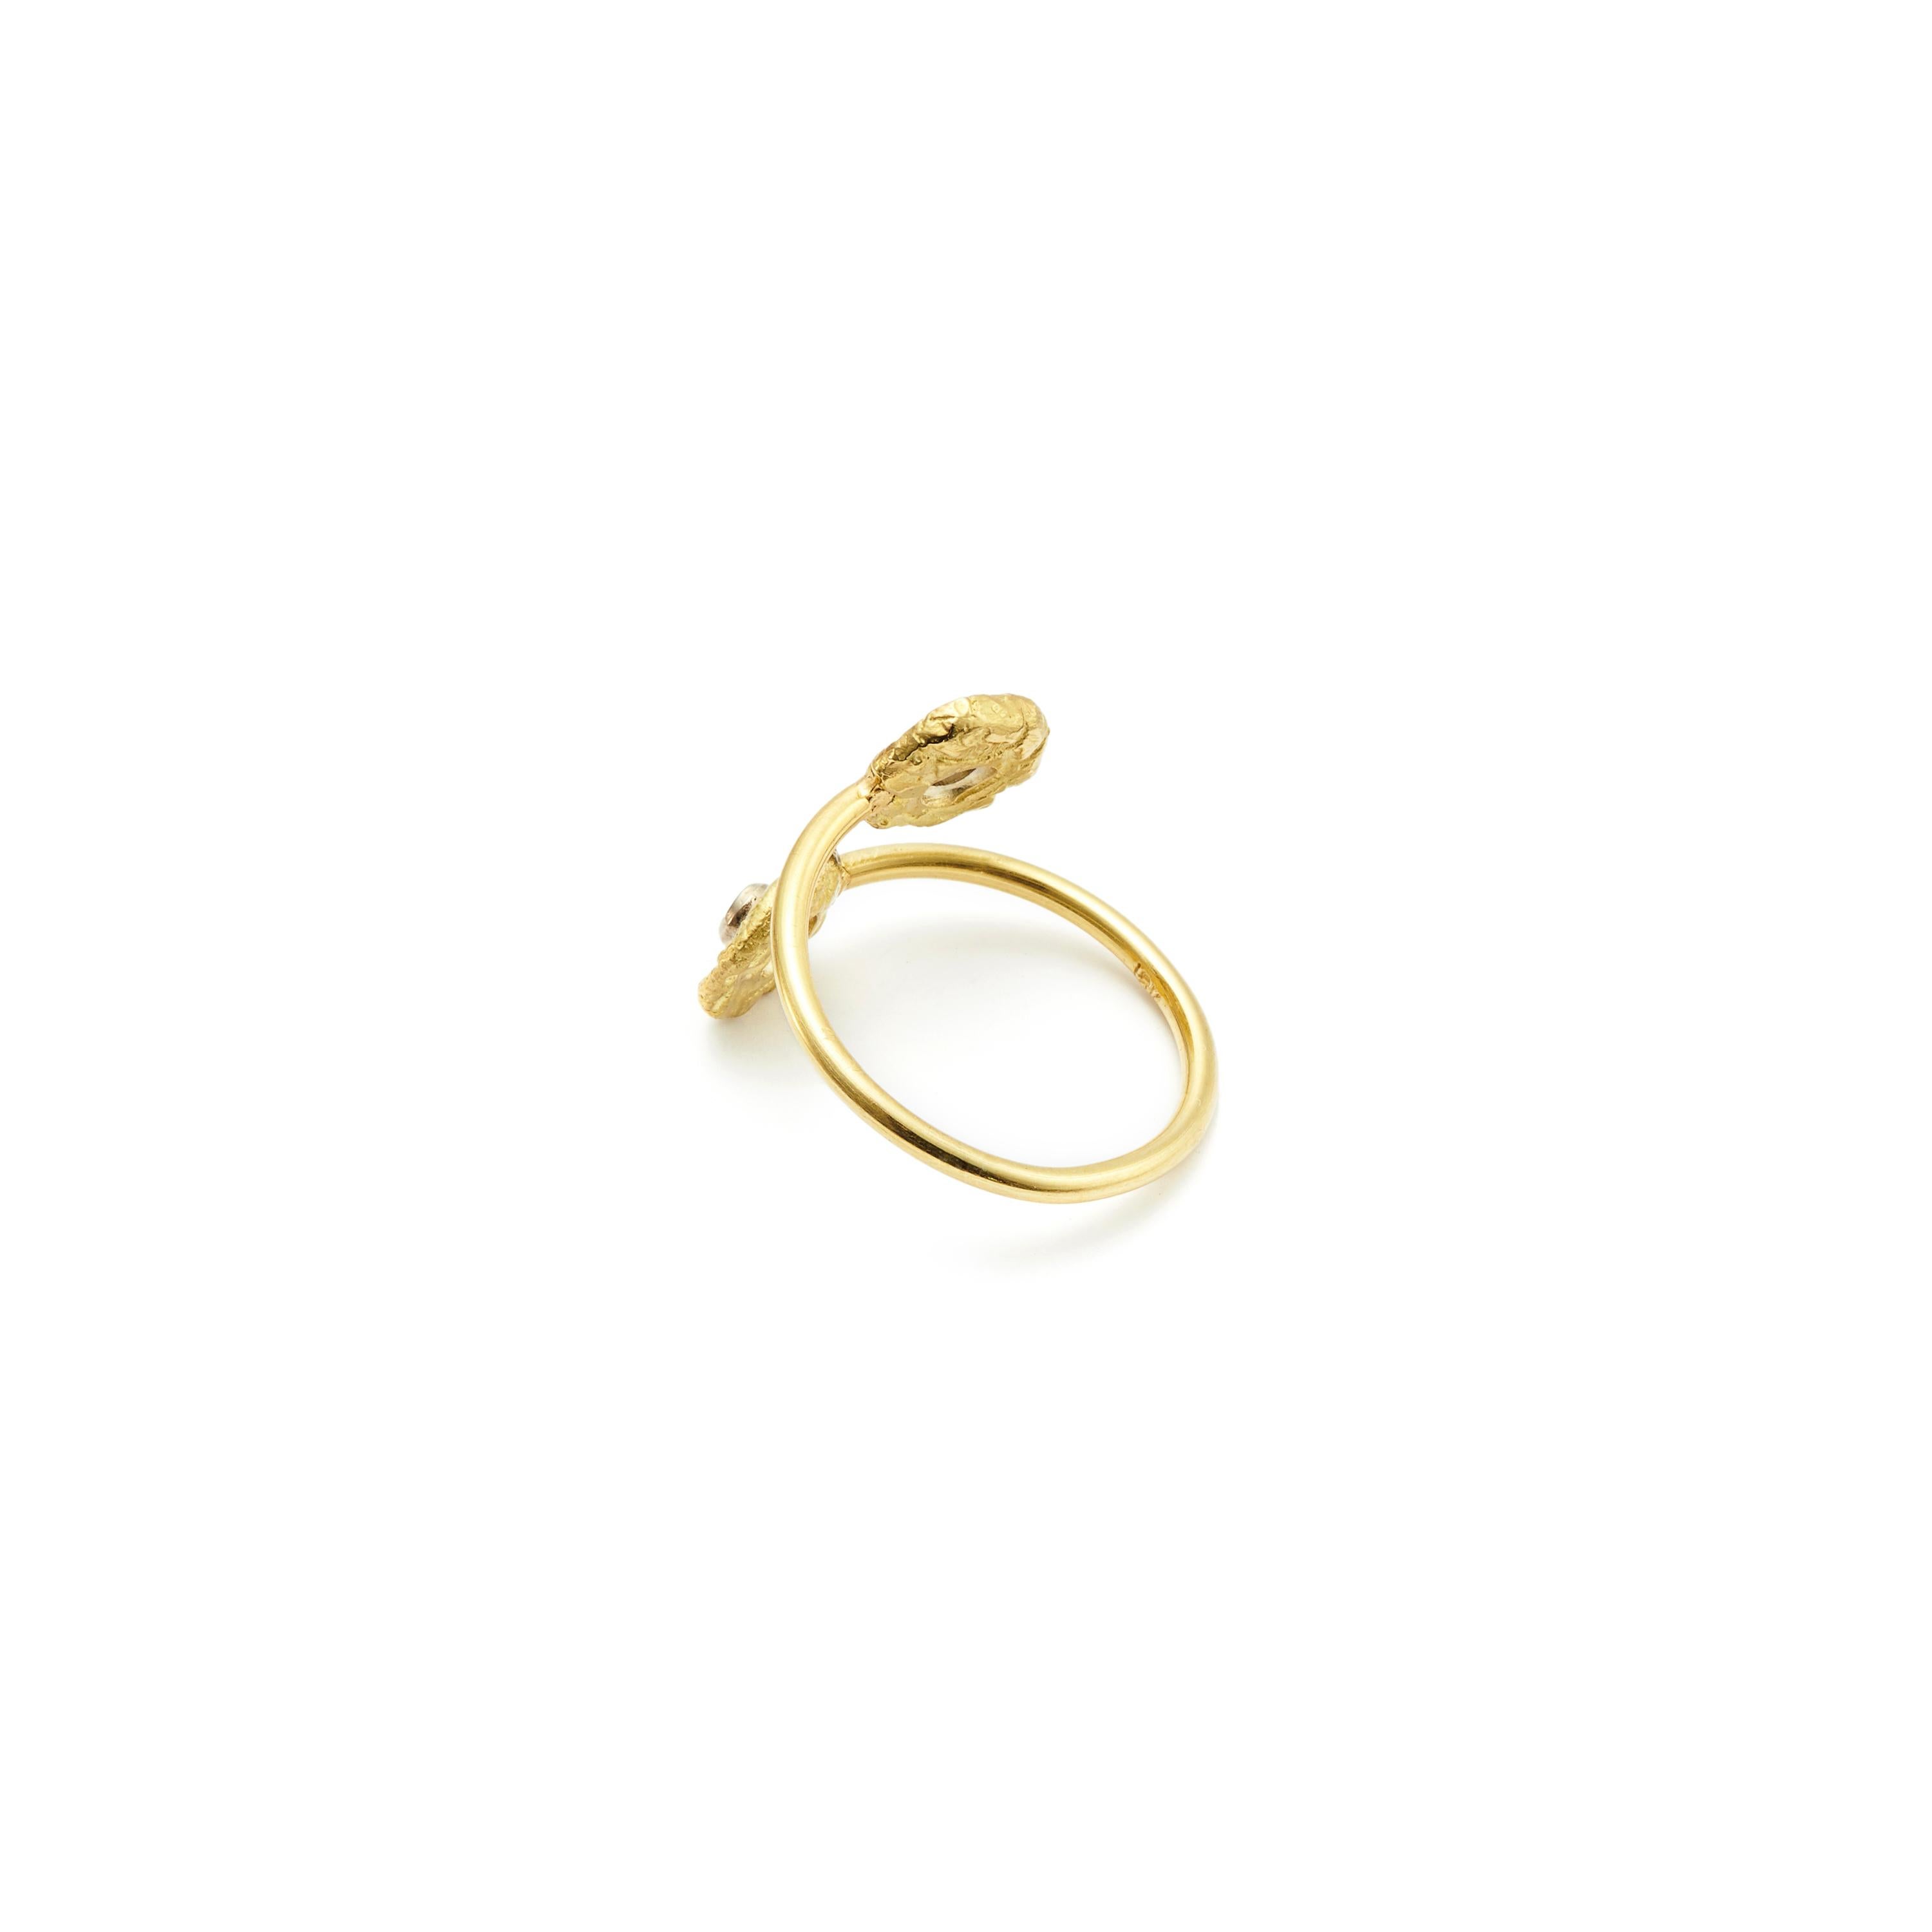 Contemporary Susan Lister Locke 18 Karat Gold “Seaquin” Bypass Ring with 0.25 Carat Diamonds For Sale